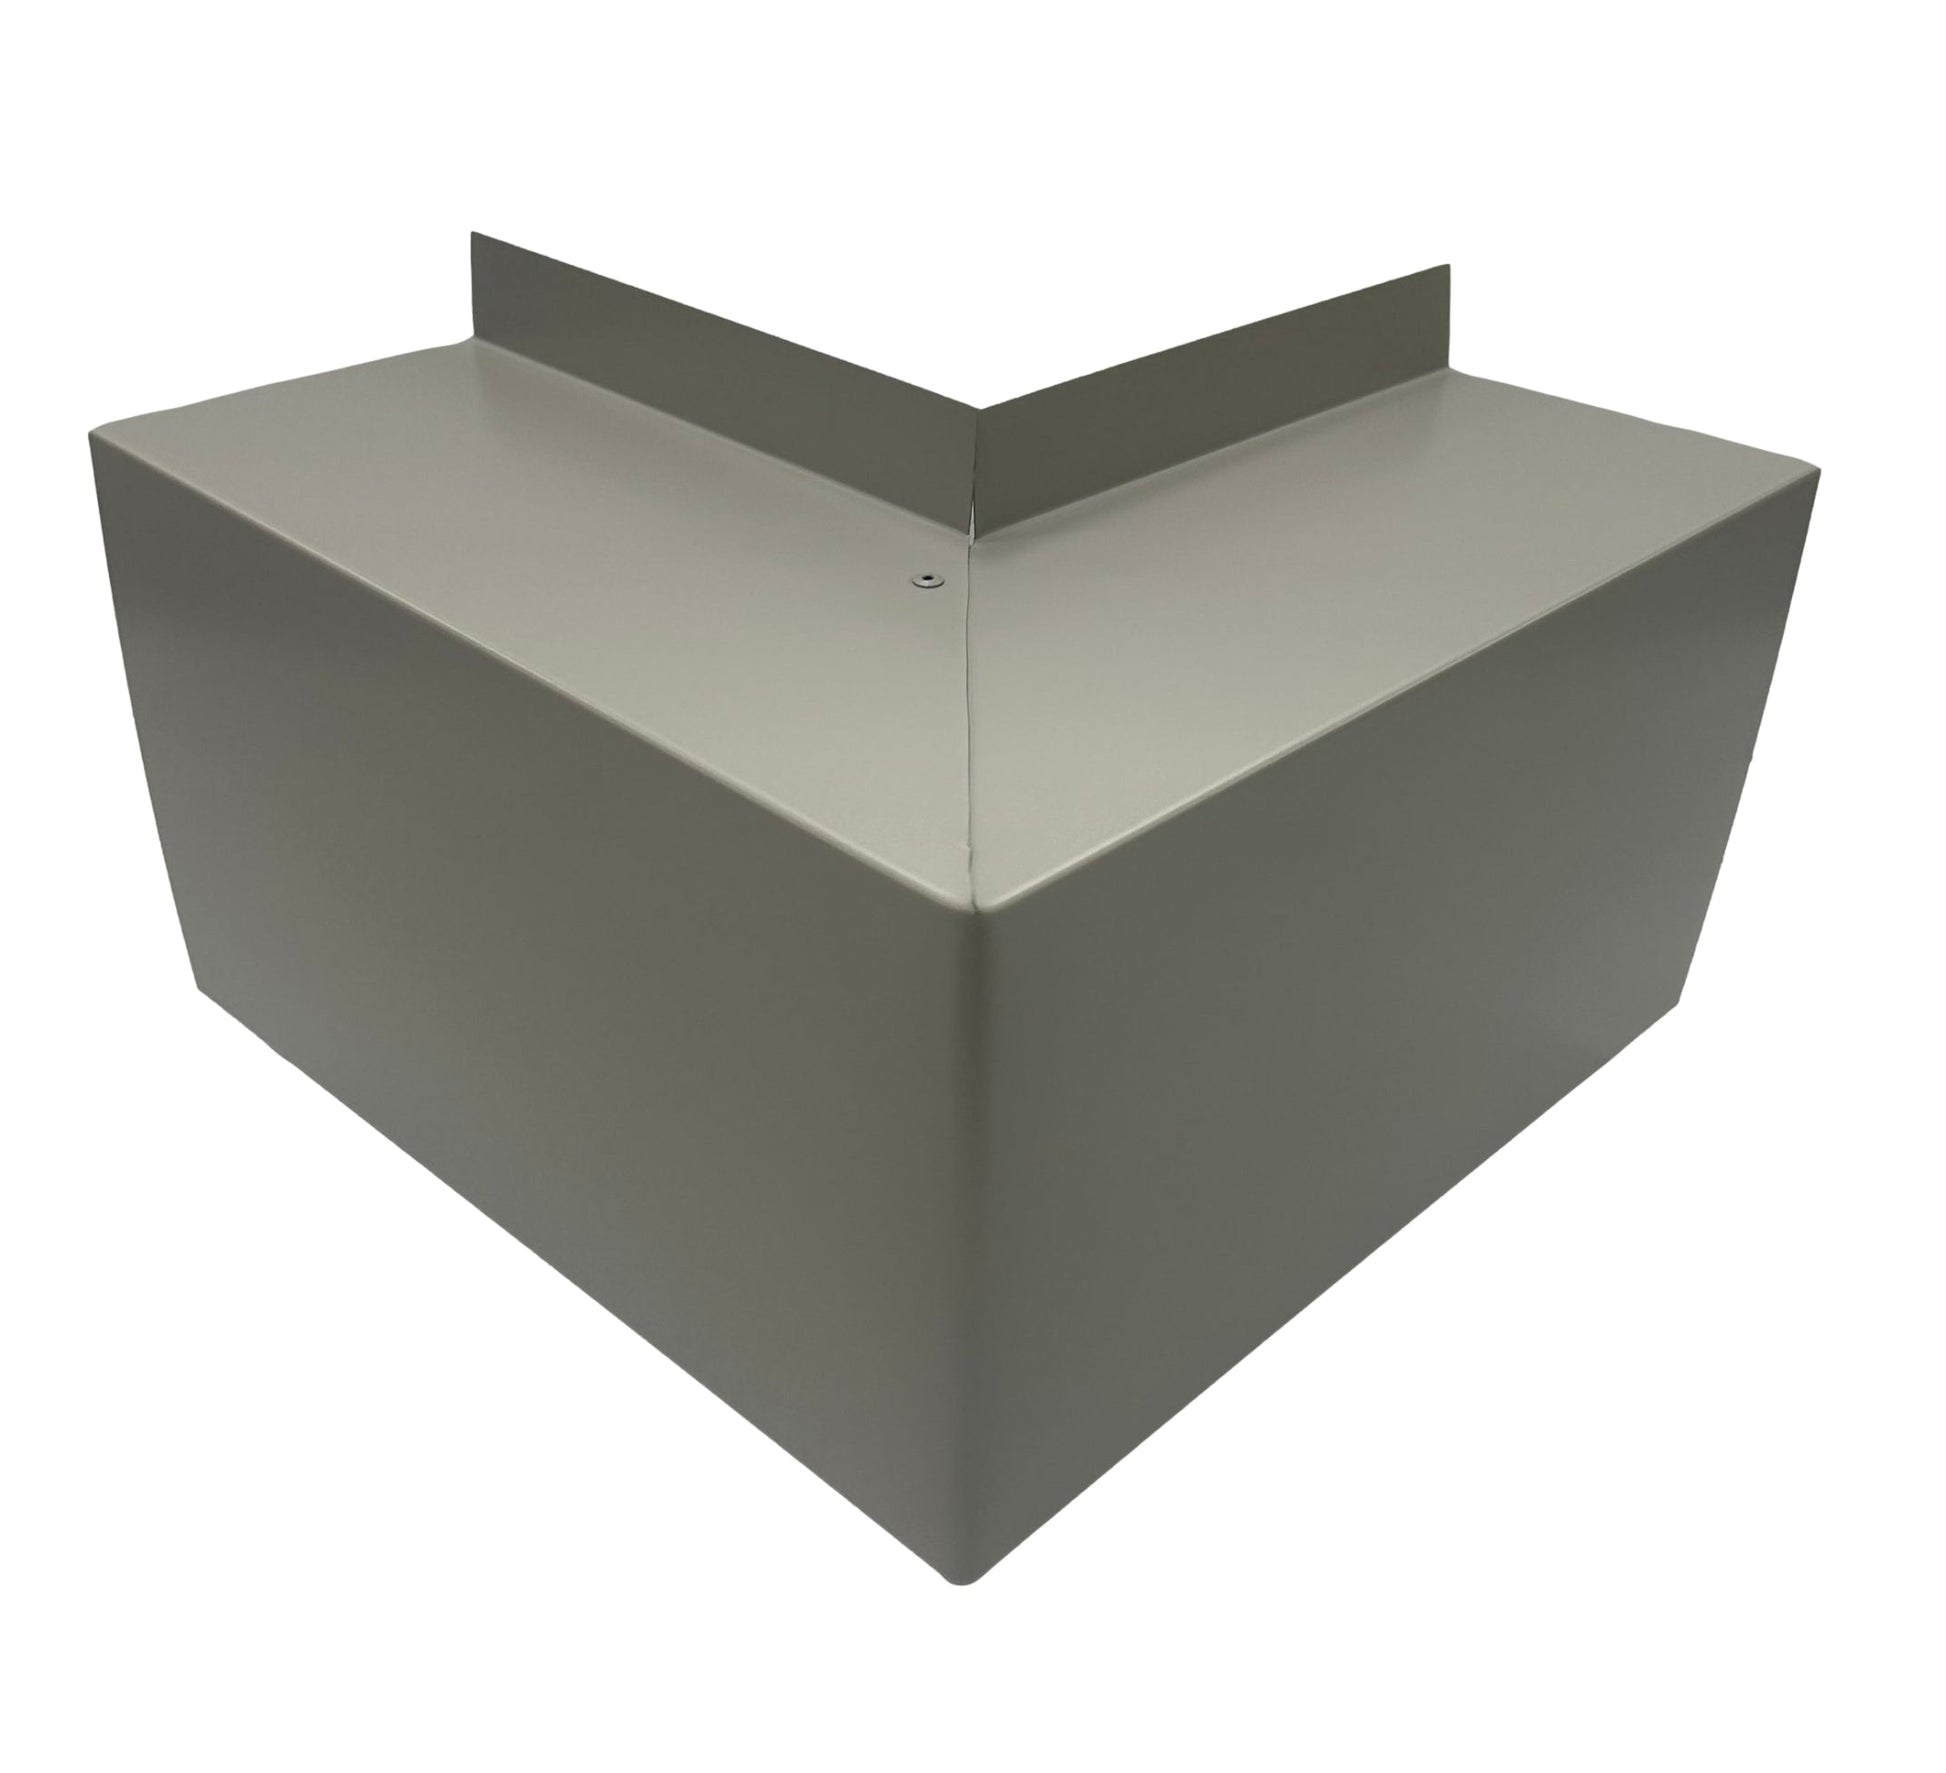 A Perma Cover Residential Series - Line Set Cover Outside Corner Elbows - Premium Quality, with a light gray finish, designed to protect wall corners from impact and damage. Featuring premium quality elbows, the cover has a sleek, minimalist design and a smooth surface, with a visible screw indicating where it is fastened for simple and easy installation.